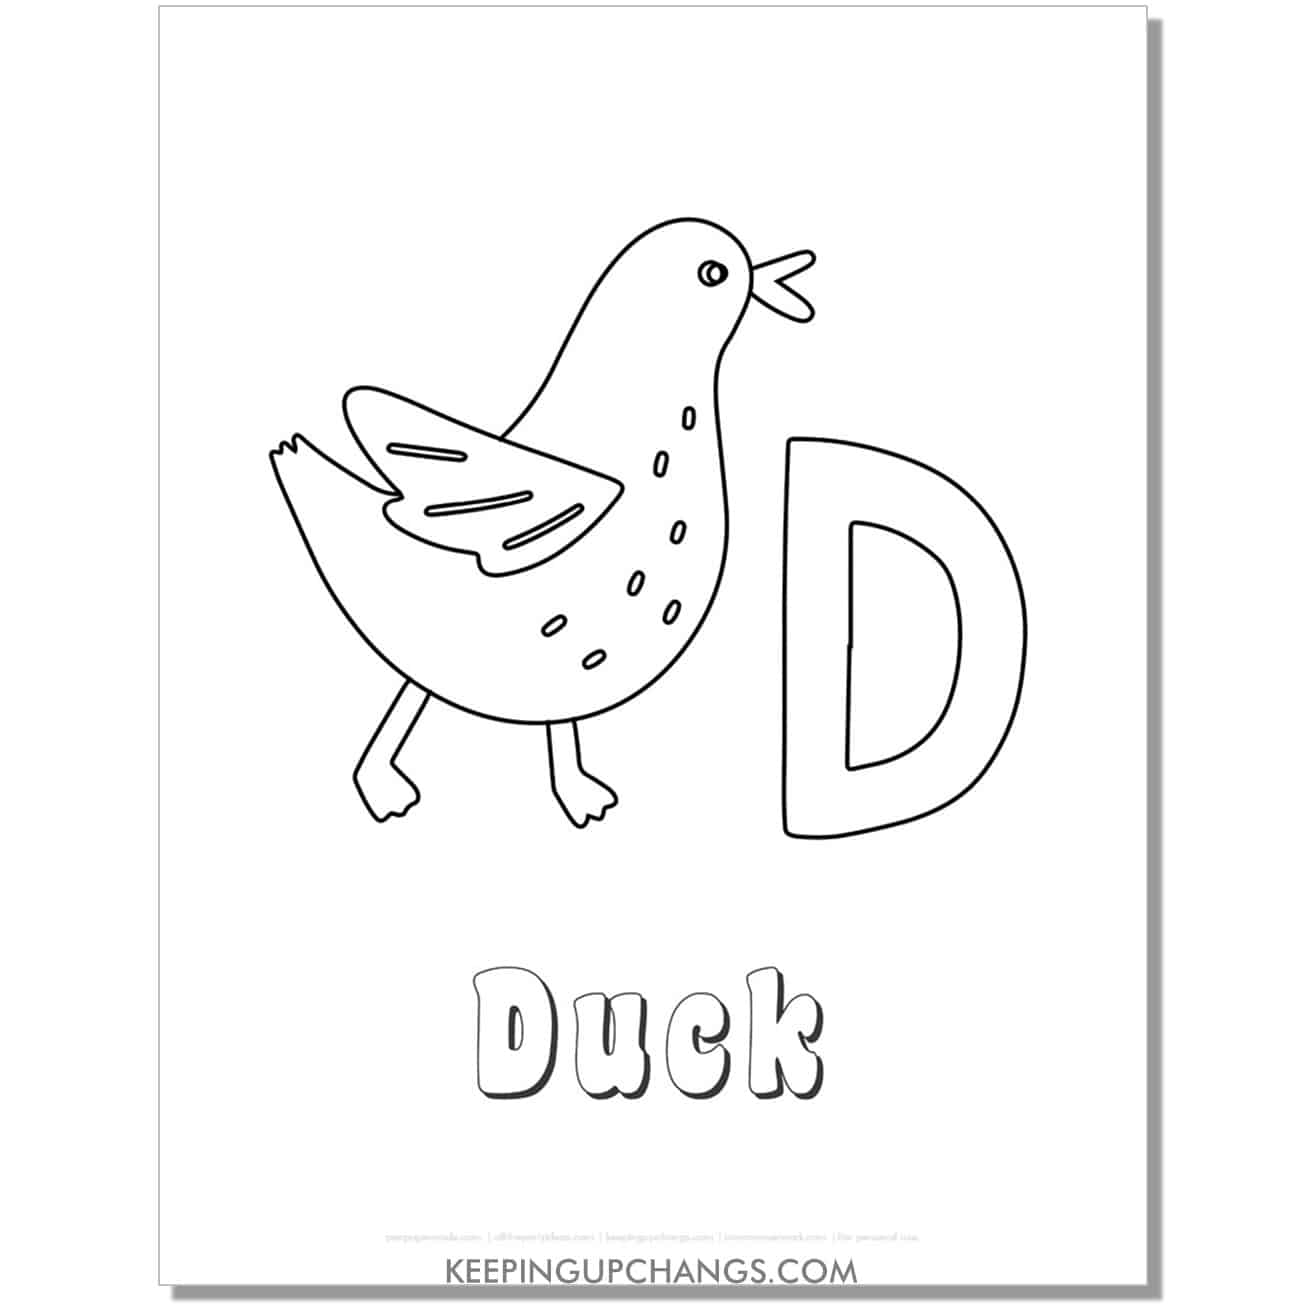 fun abc d coloring page with duck hand drawing.